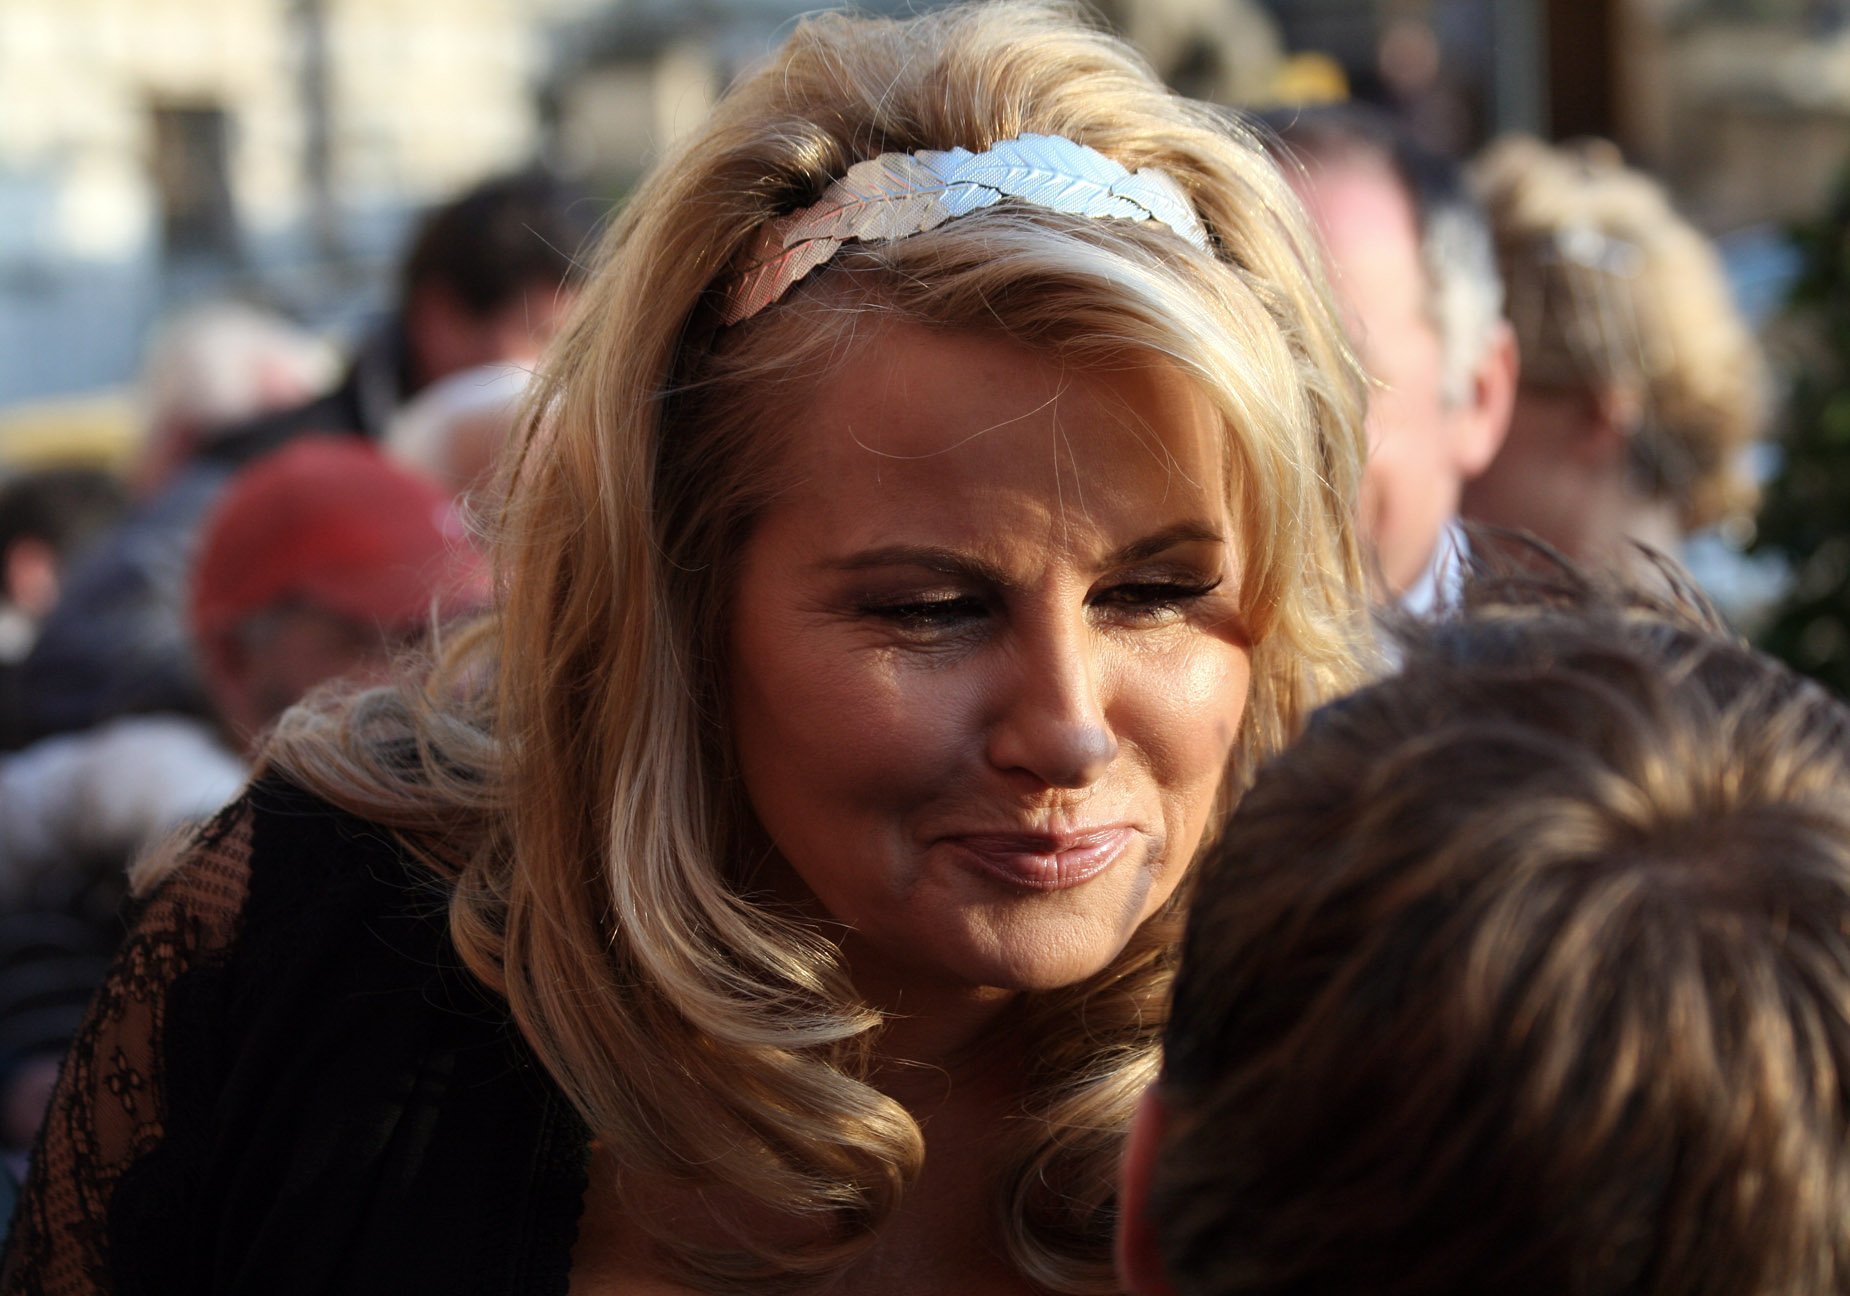 Jennifer Coolidge at the Romy TV awards at Hofburg Imperial Palace in Vienna on April 12, 2012 | Photo: Wikimedia